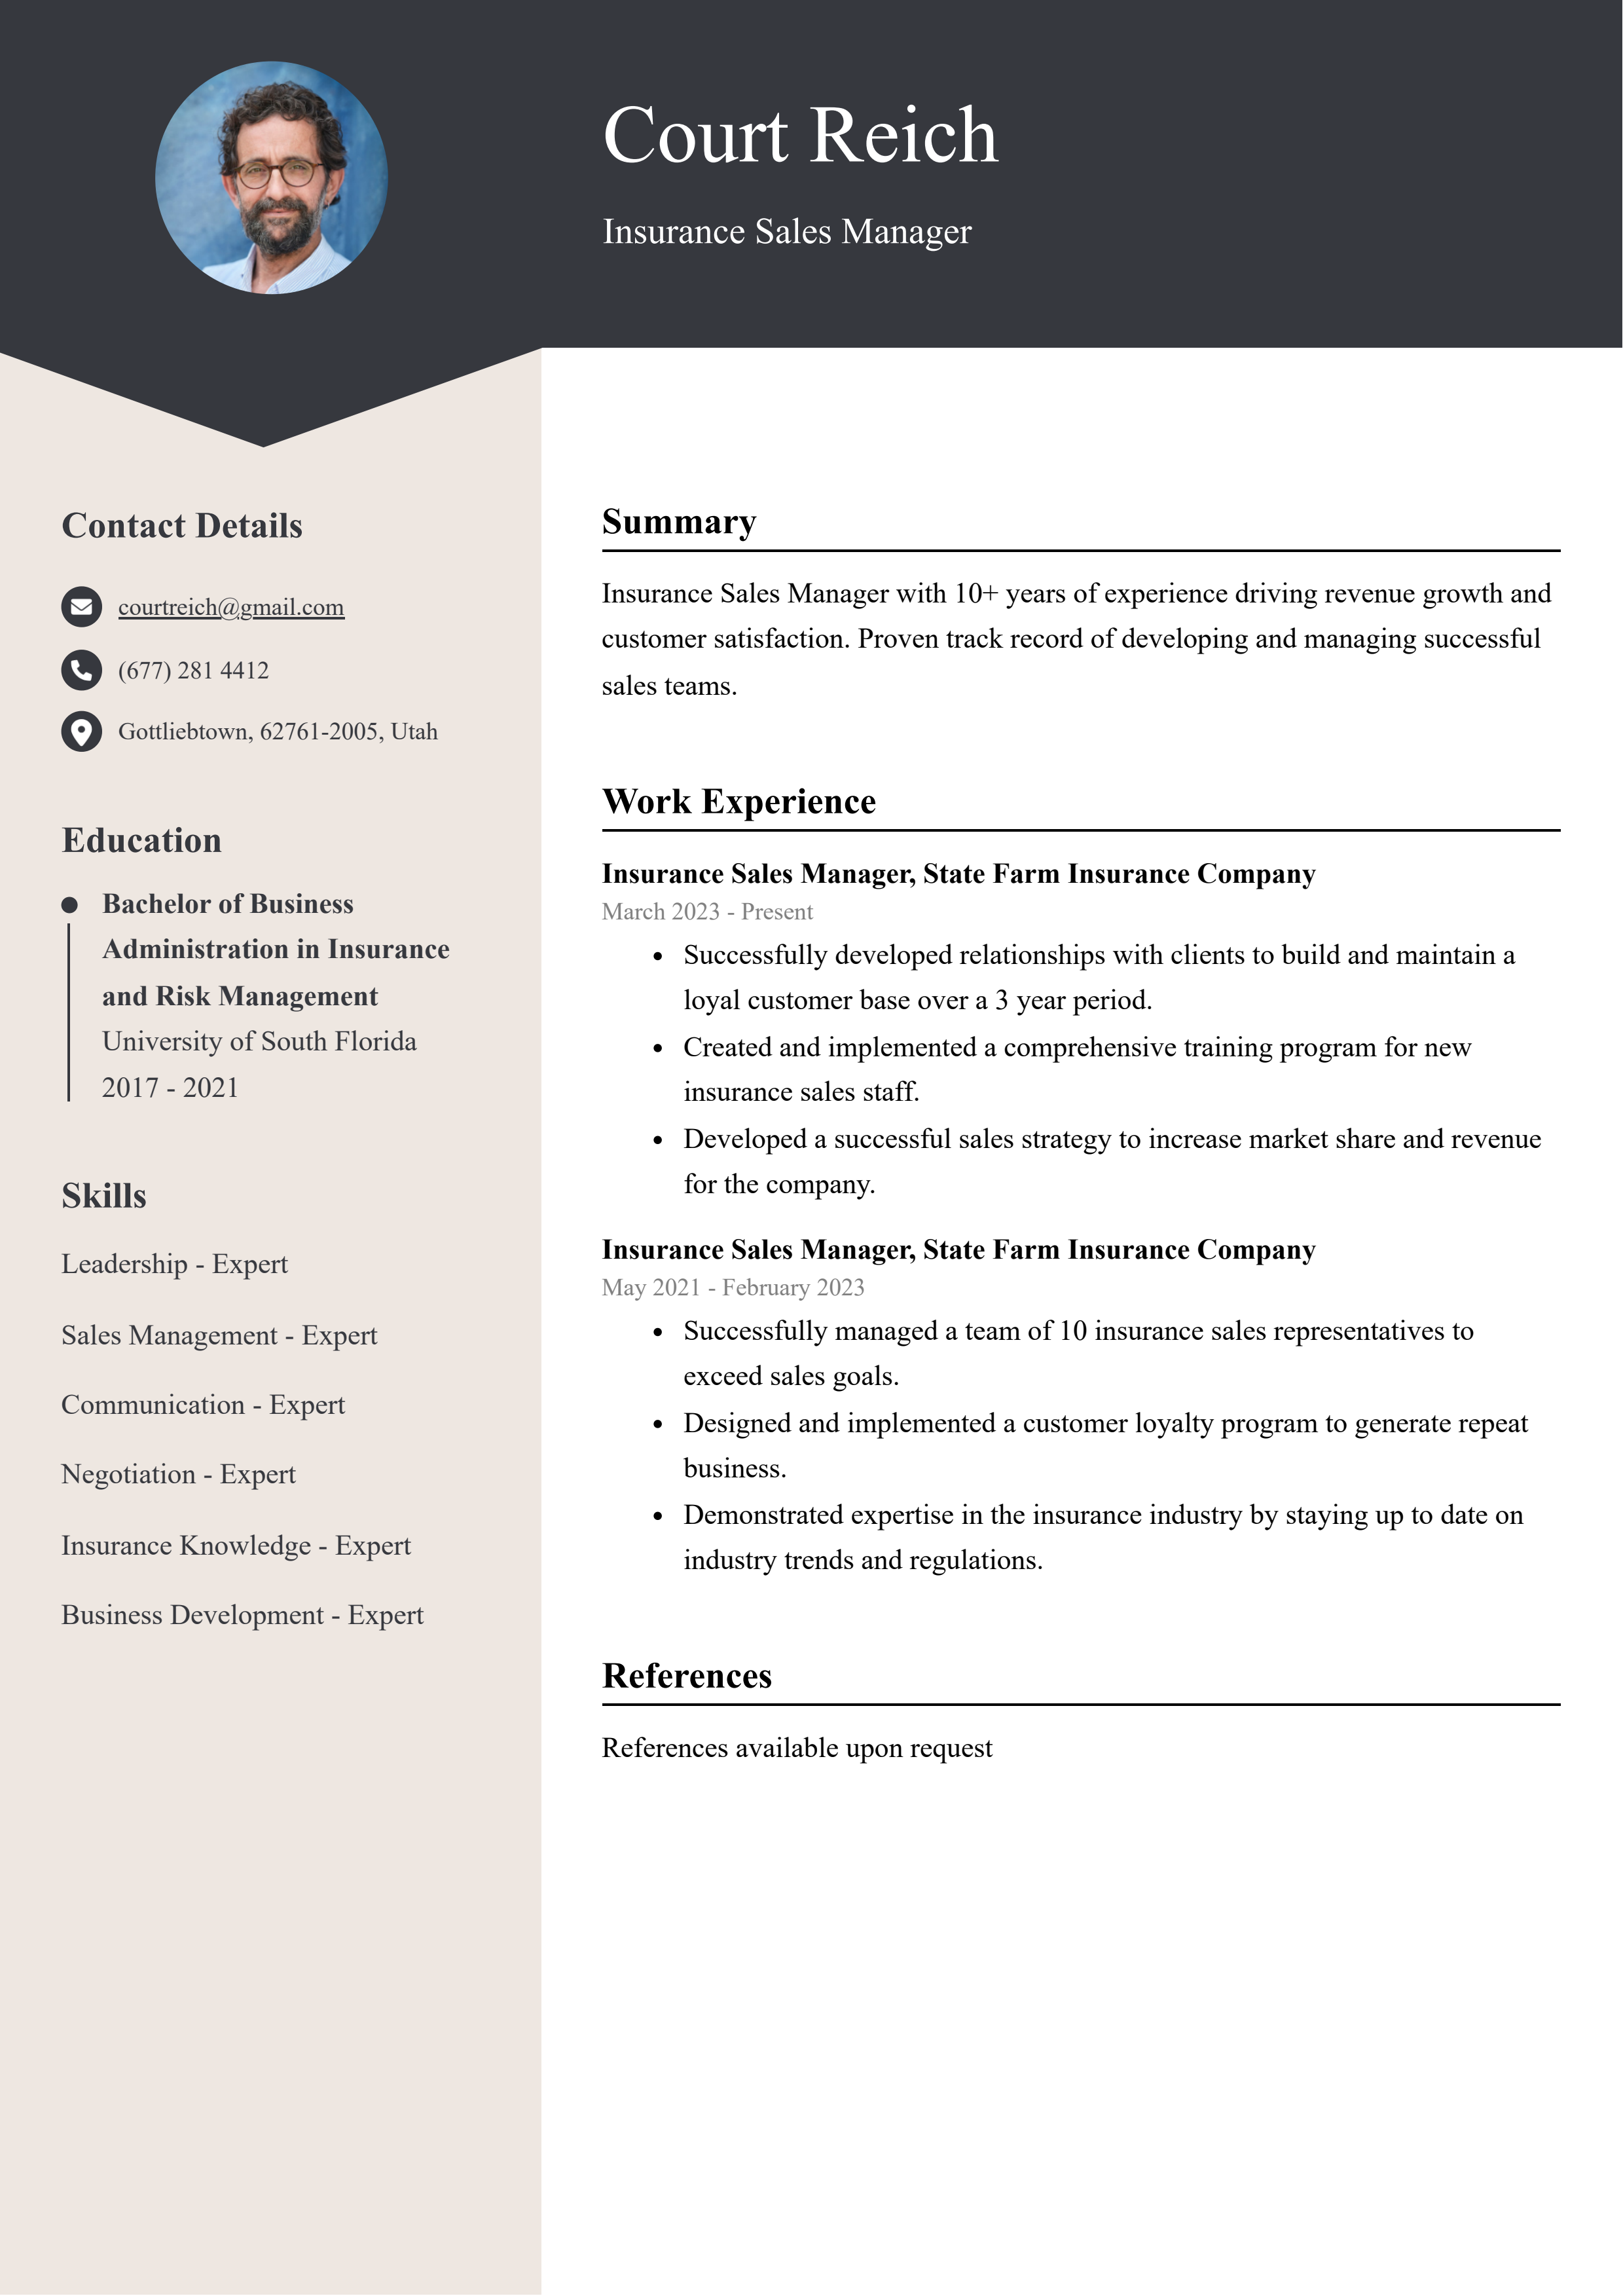 Insurance Sales Manager CV Example